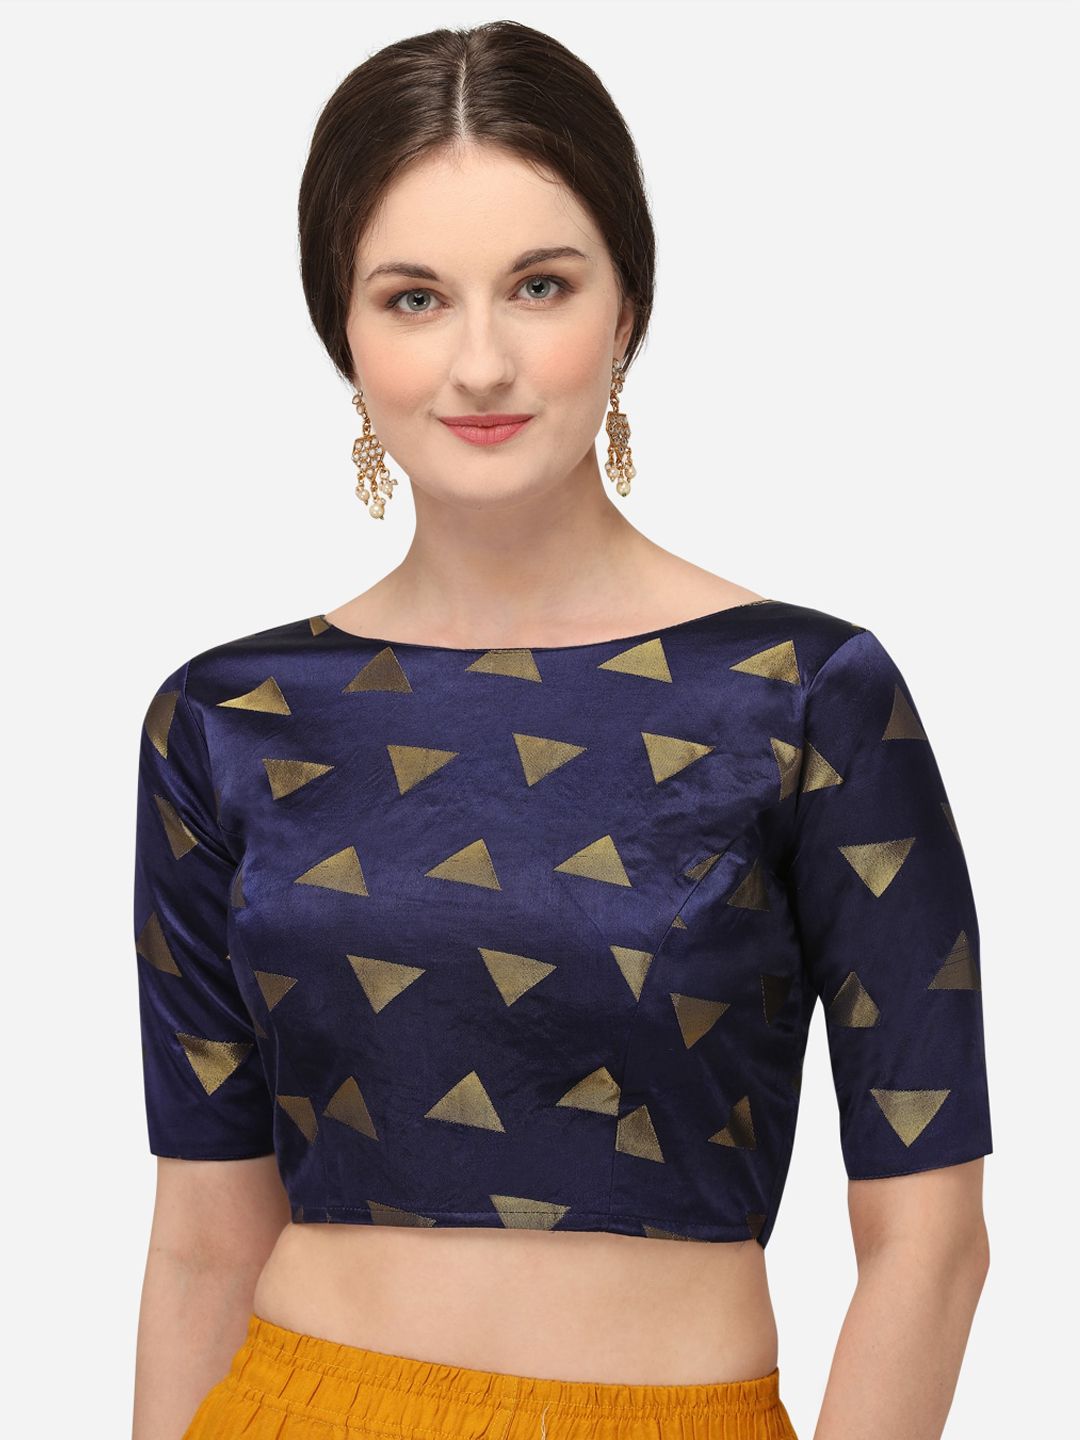 Fab Dadu Women Navy Blue & Gold-Colored Printed Silk Saree Blouse Price in India